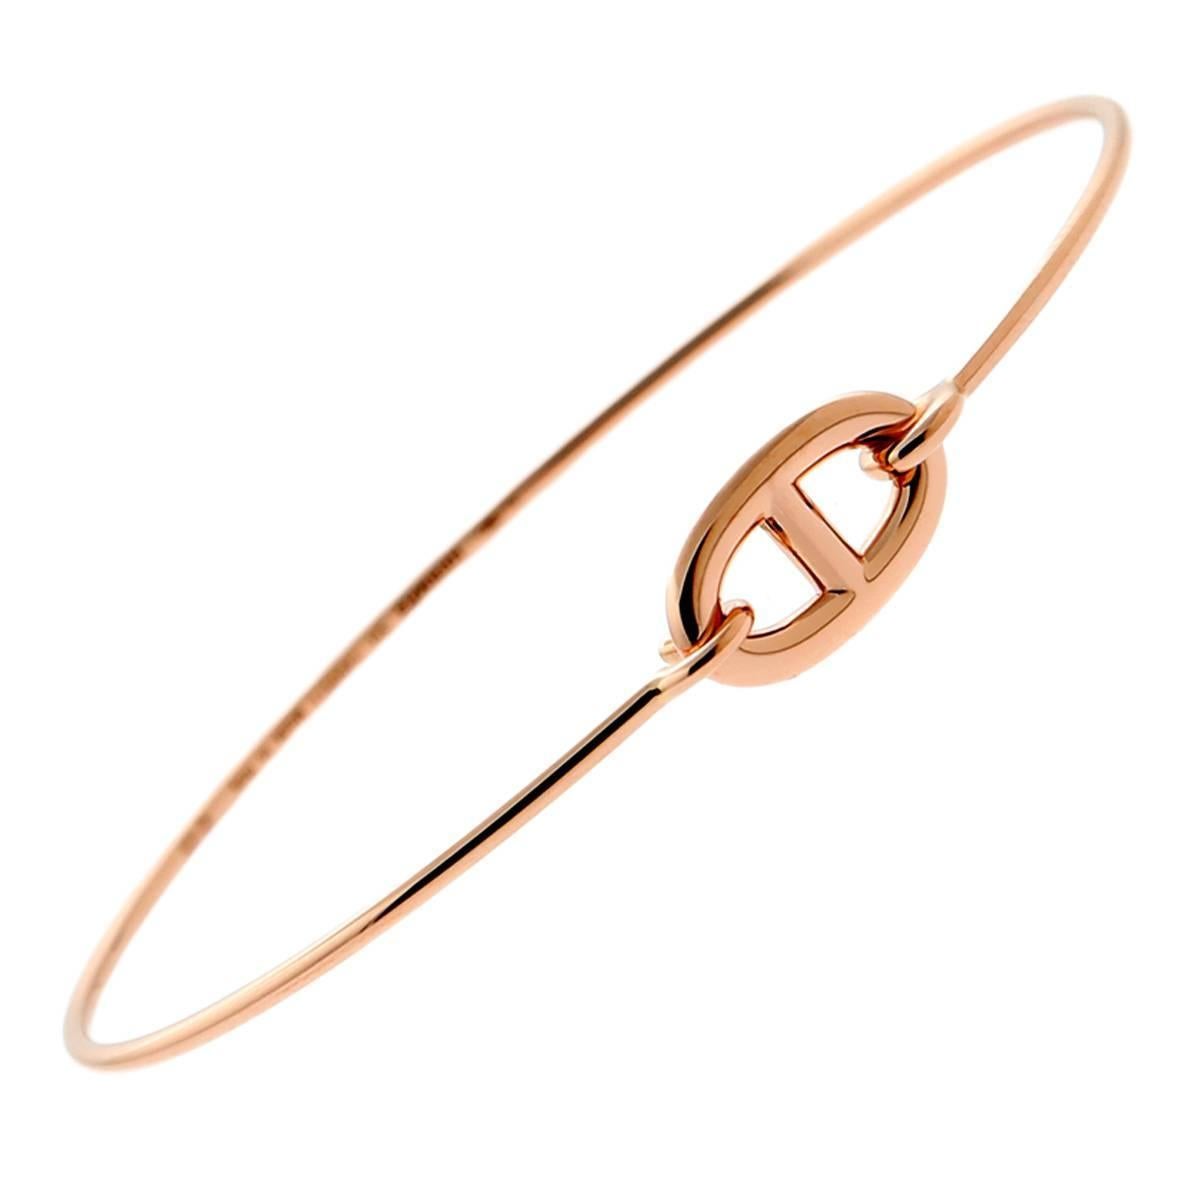 A fabulous rose gold bracelet by Hermes featuring their signature Chaine d Ancre motif at the forefront of this chic bangle. 

Inventory ID: 0000338